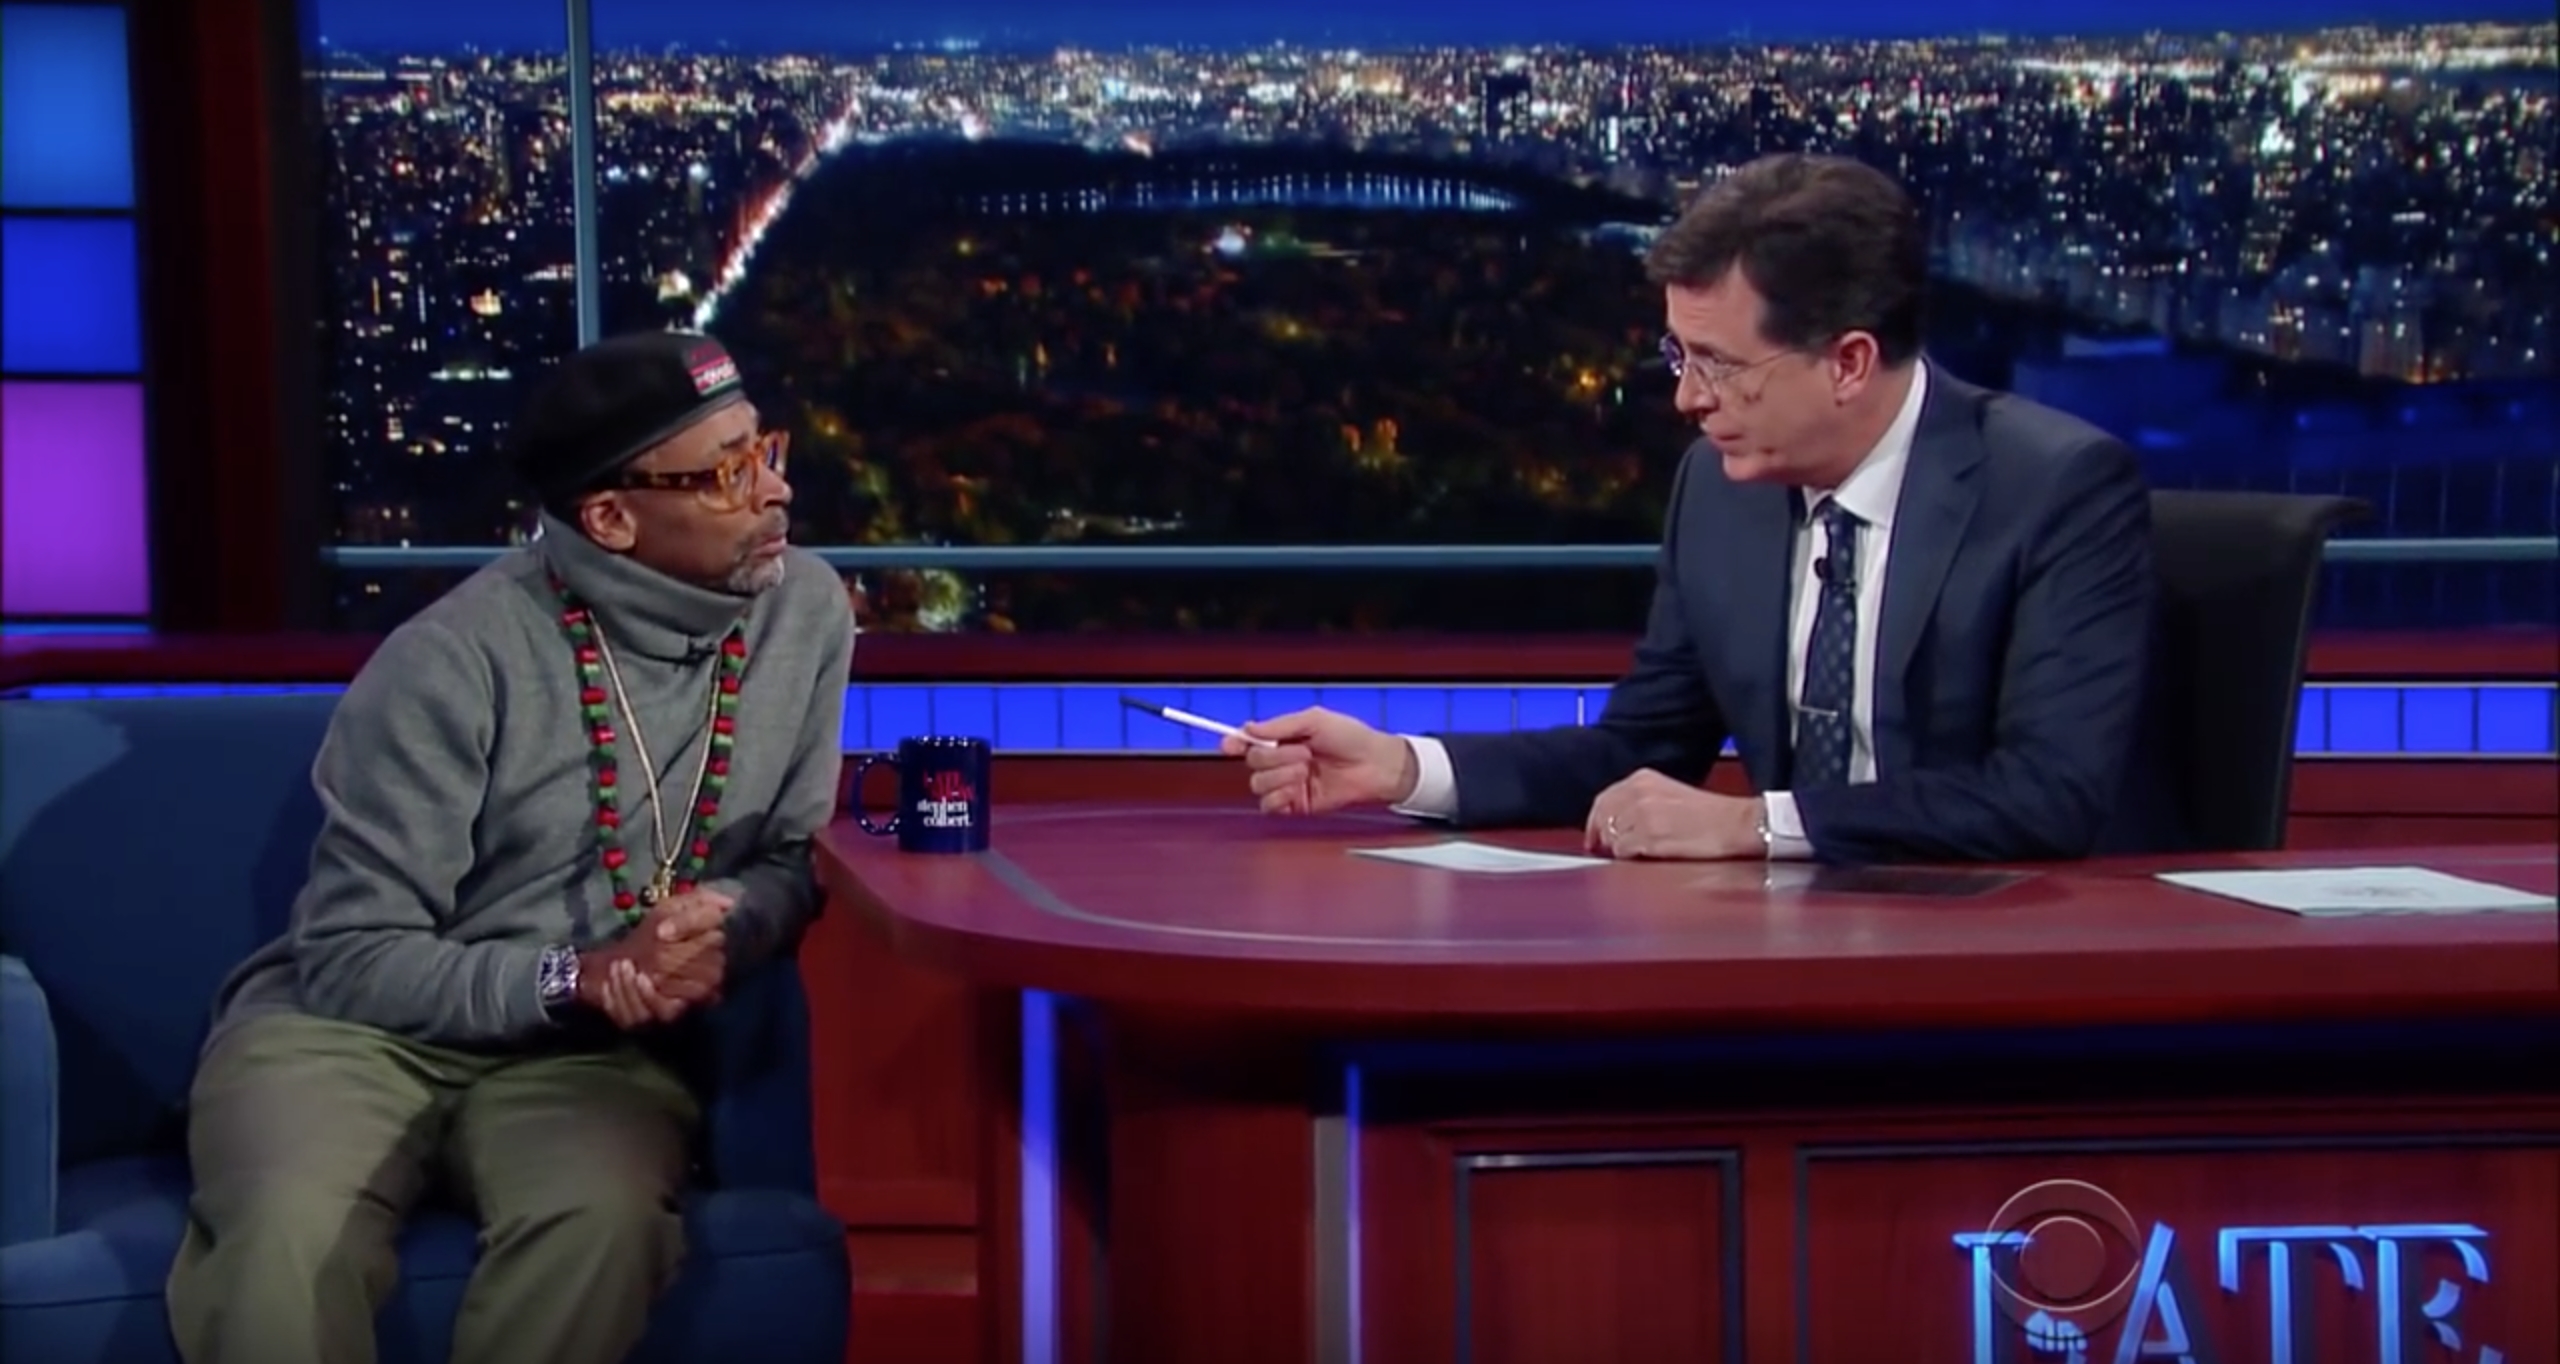 An image of Spike Lee, director with Stephen Colbert